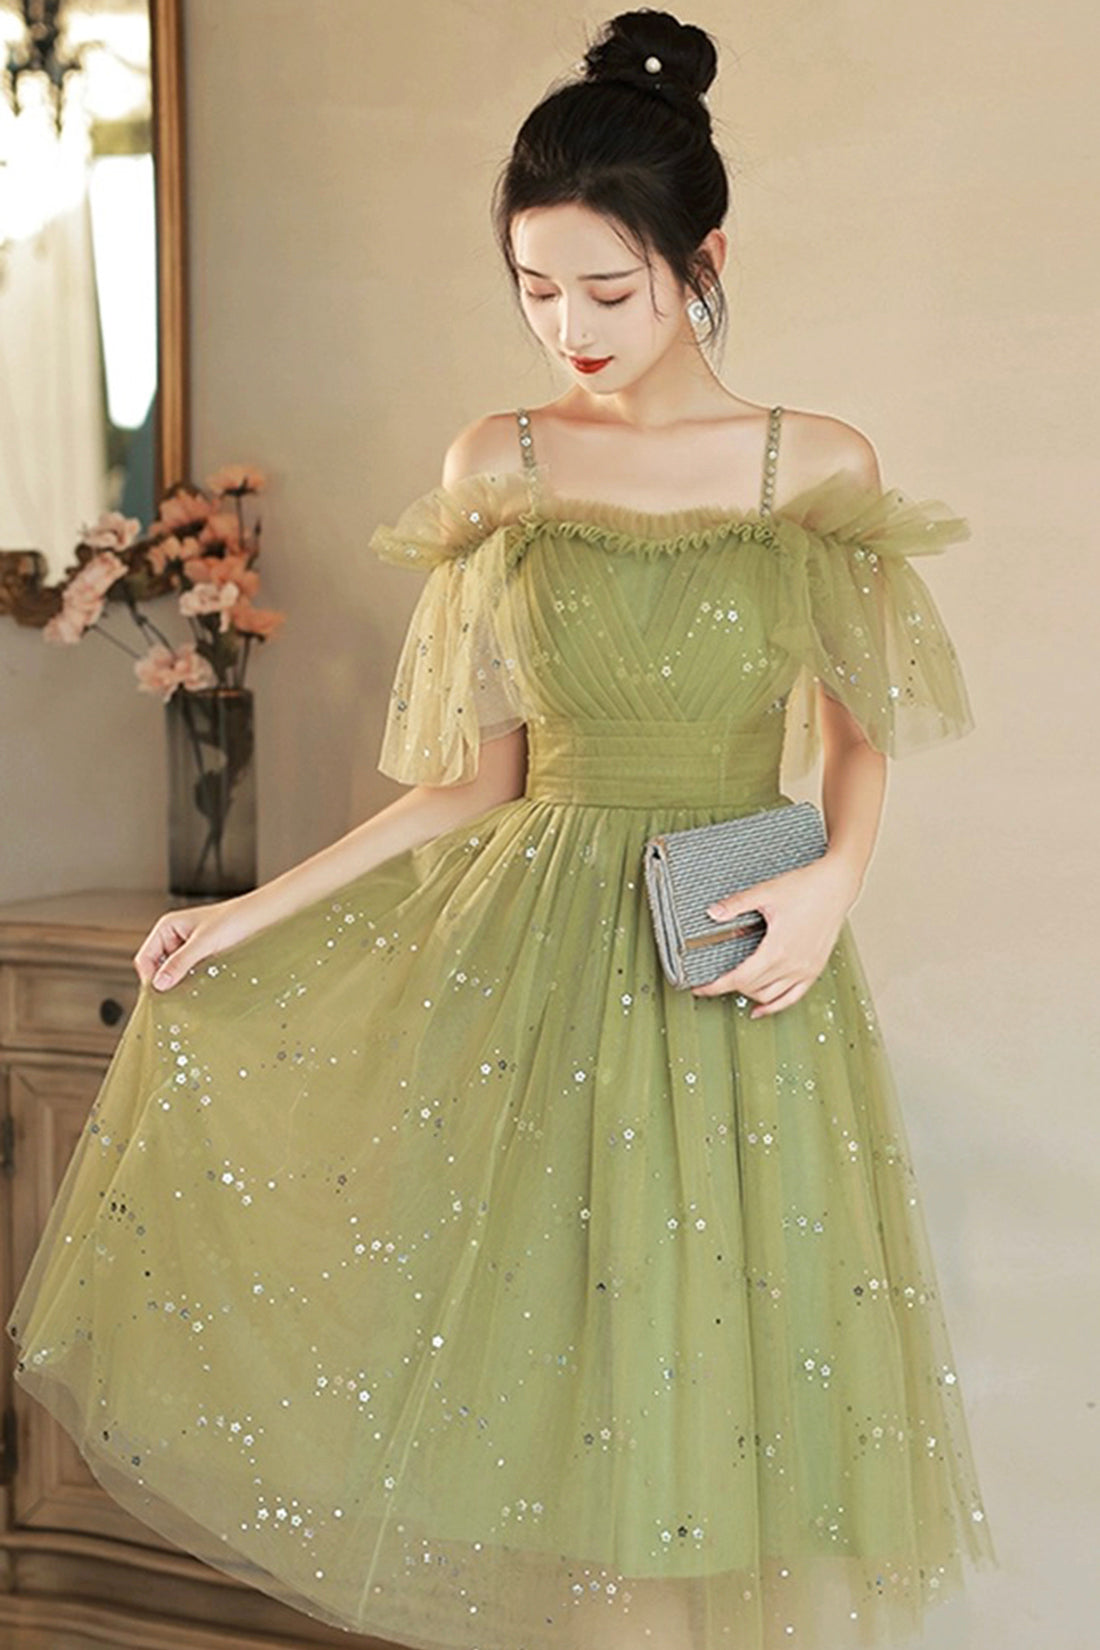 Green Spaghetti Strap Tulle Short Prom Dress, Charming Knee Length A-Line Party Dress